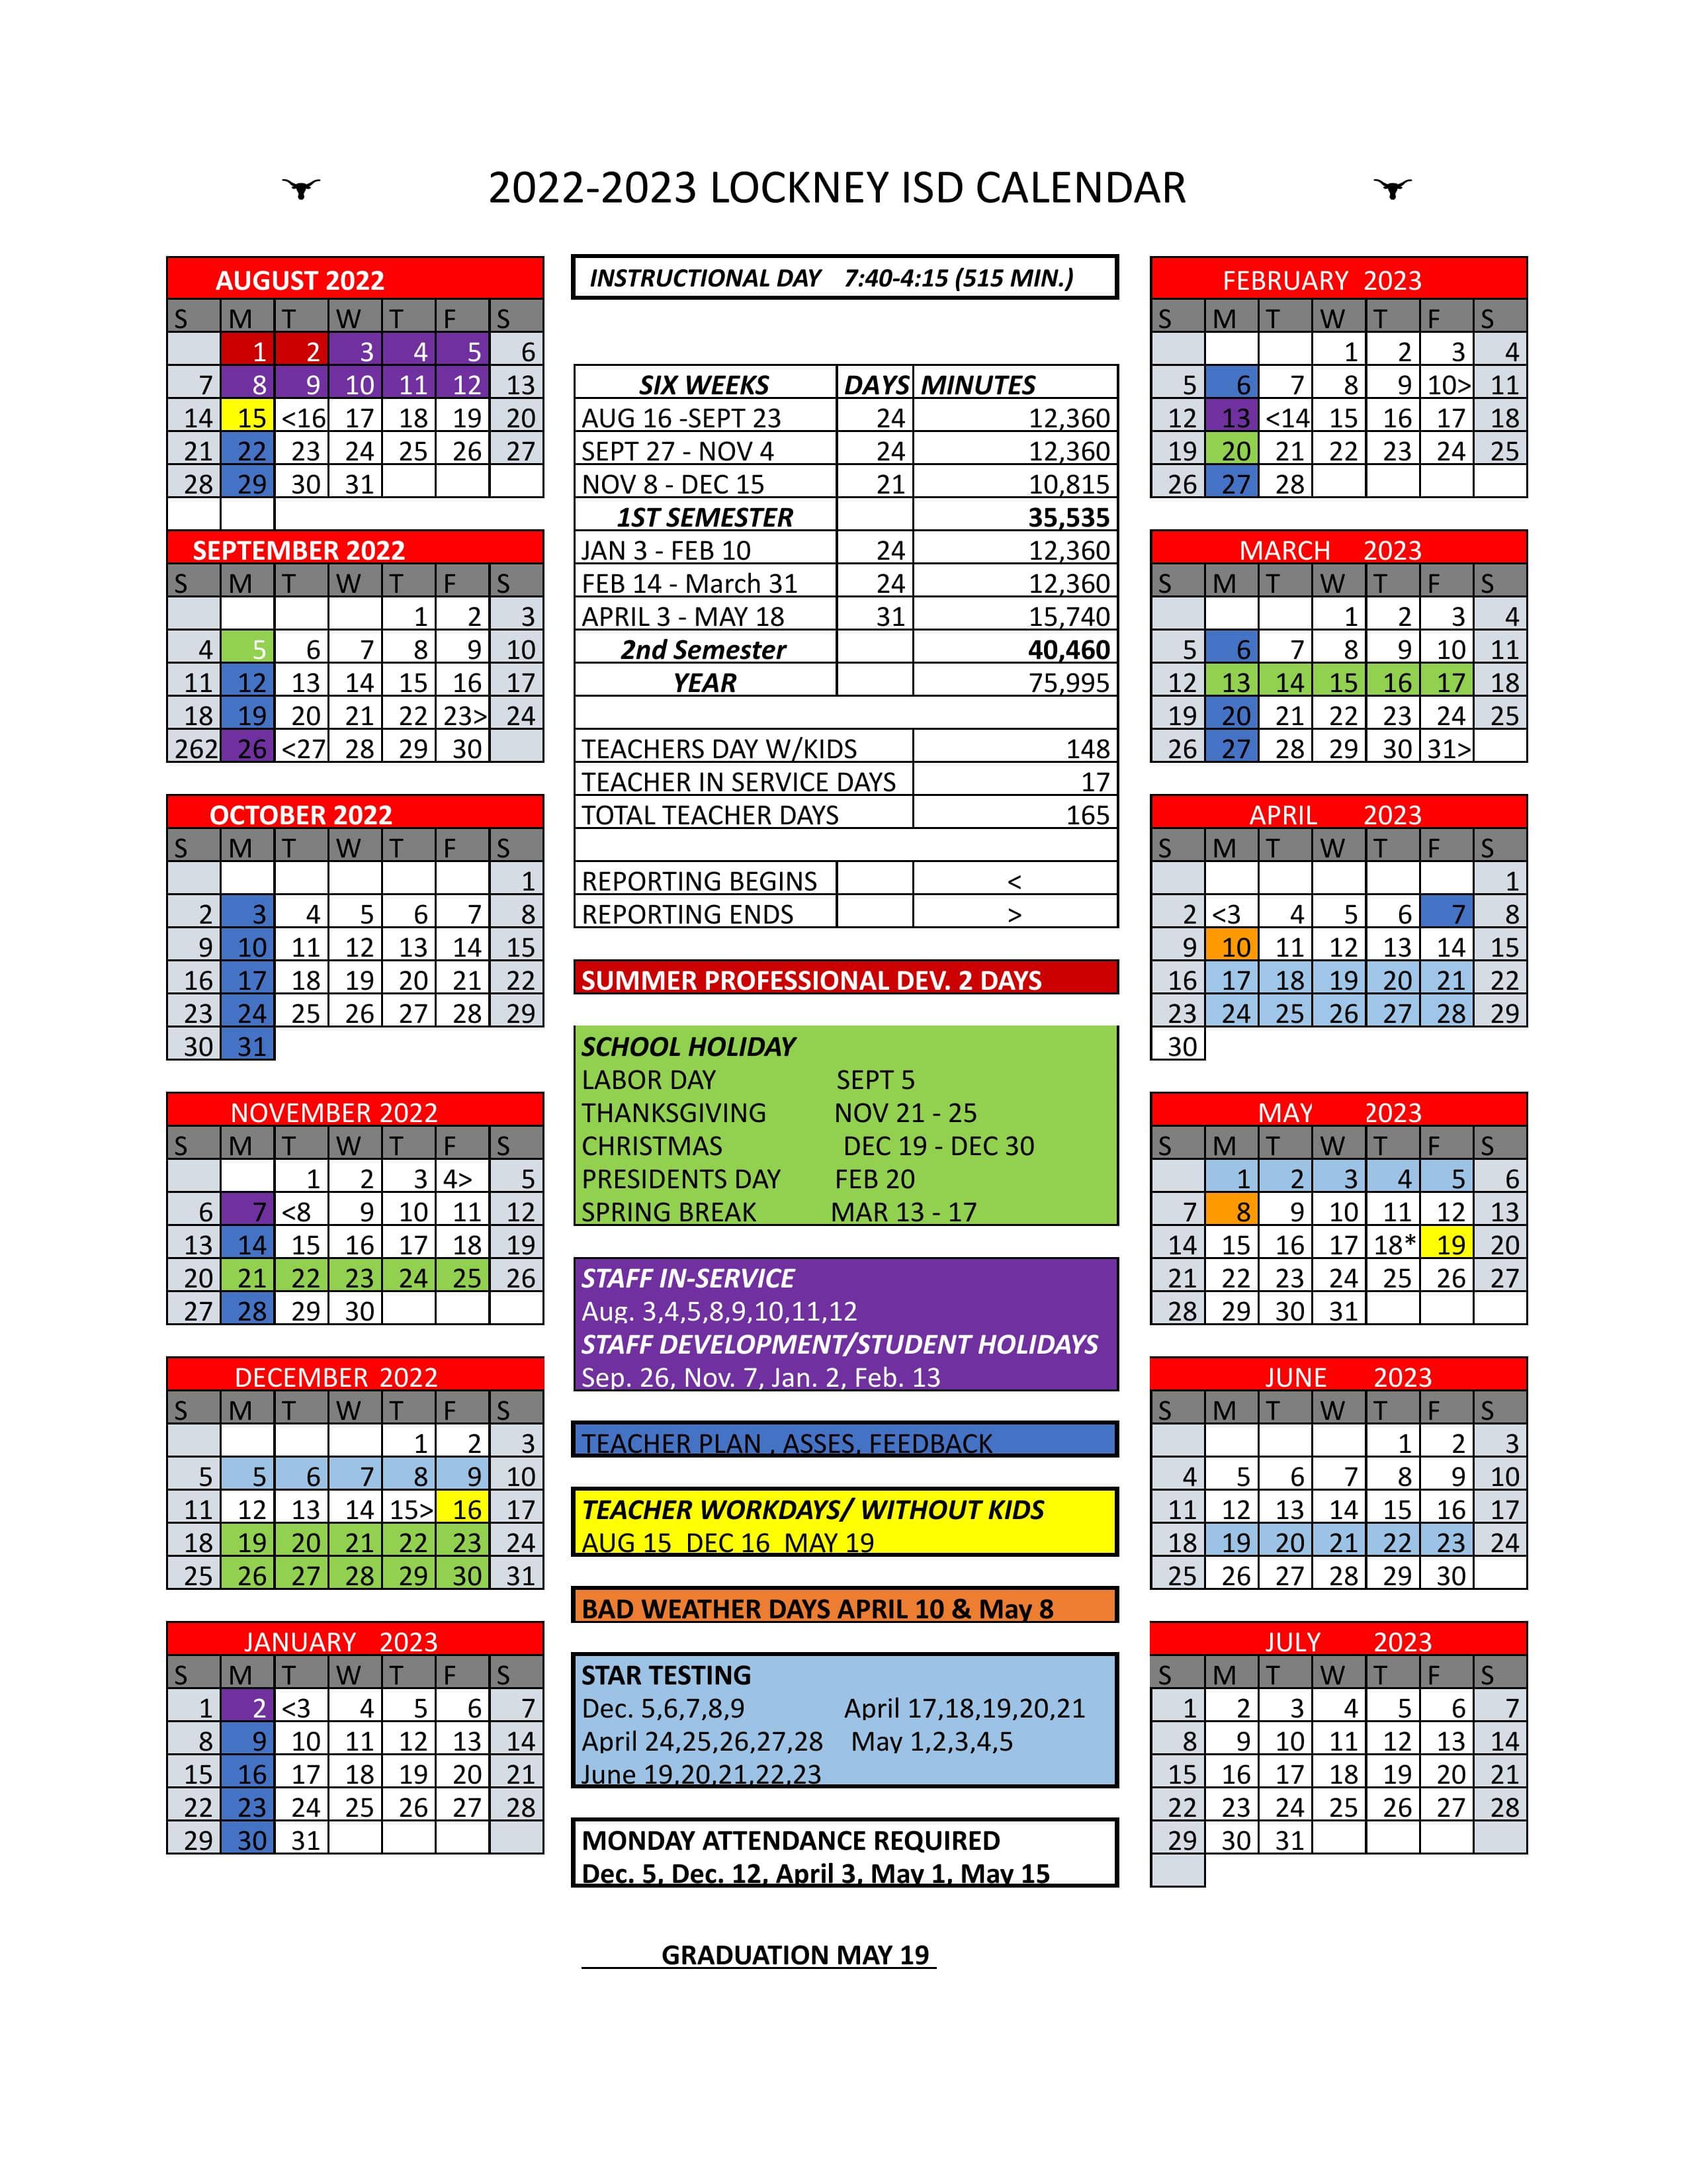 Lockney ISD continues with 4-day calendar for 2023 | Floyd County Record